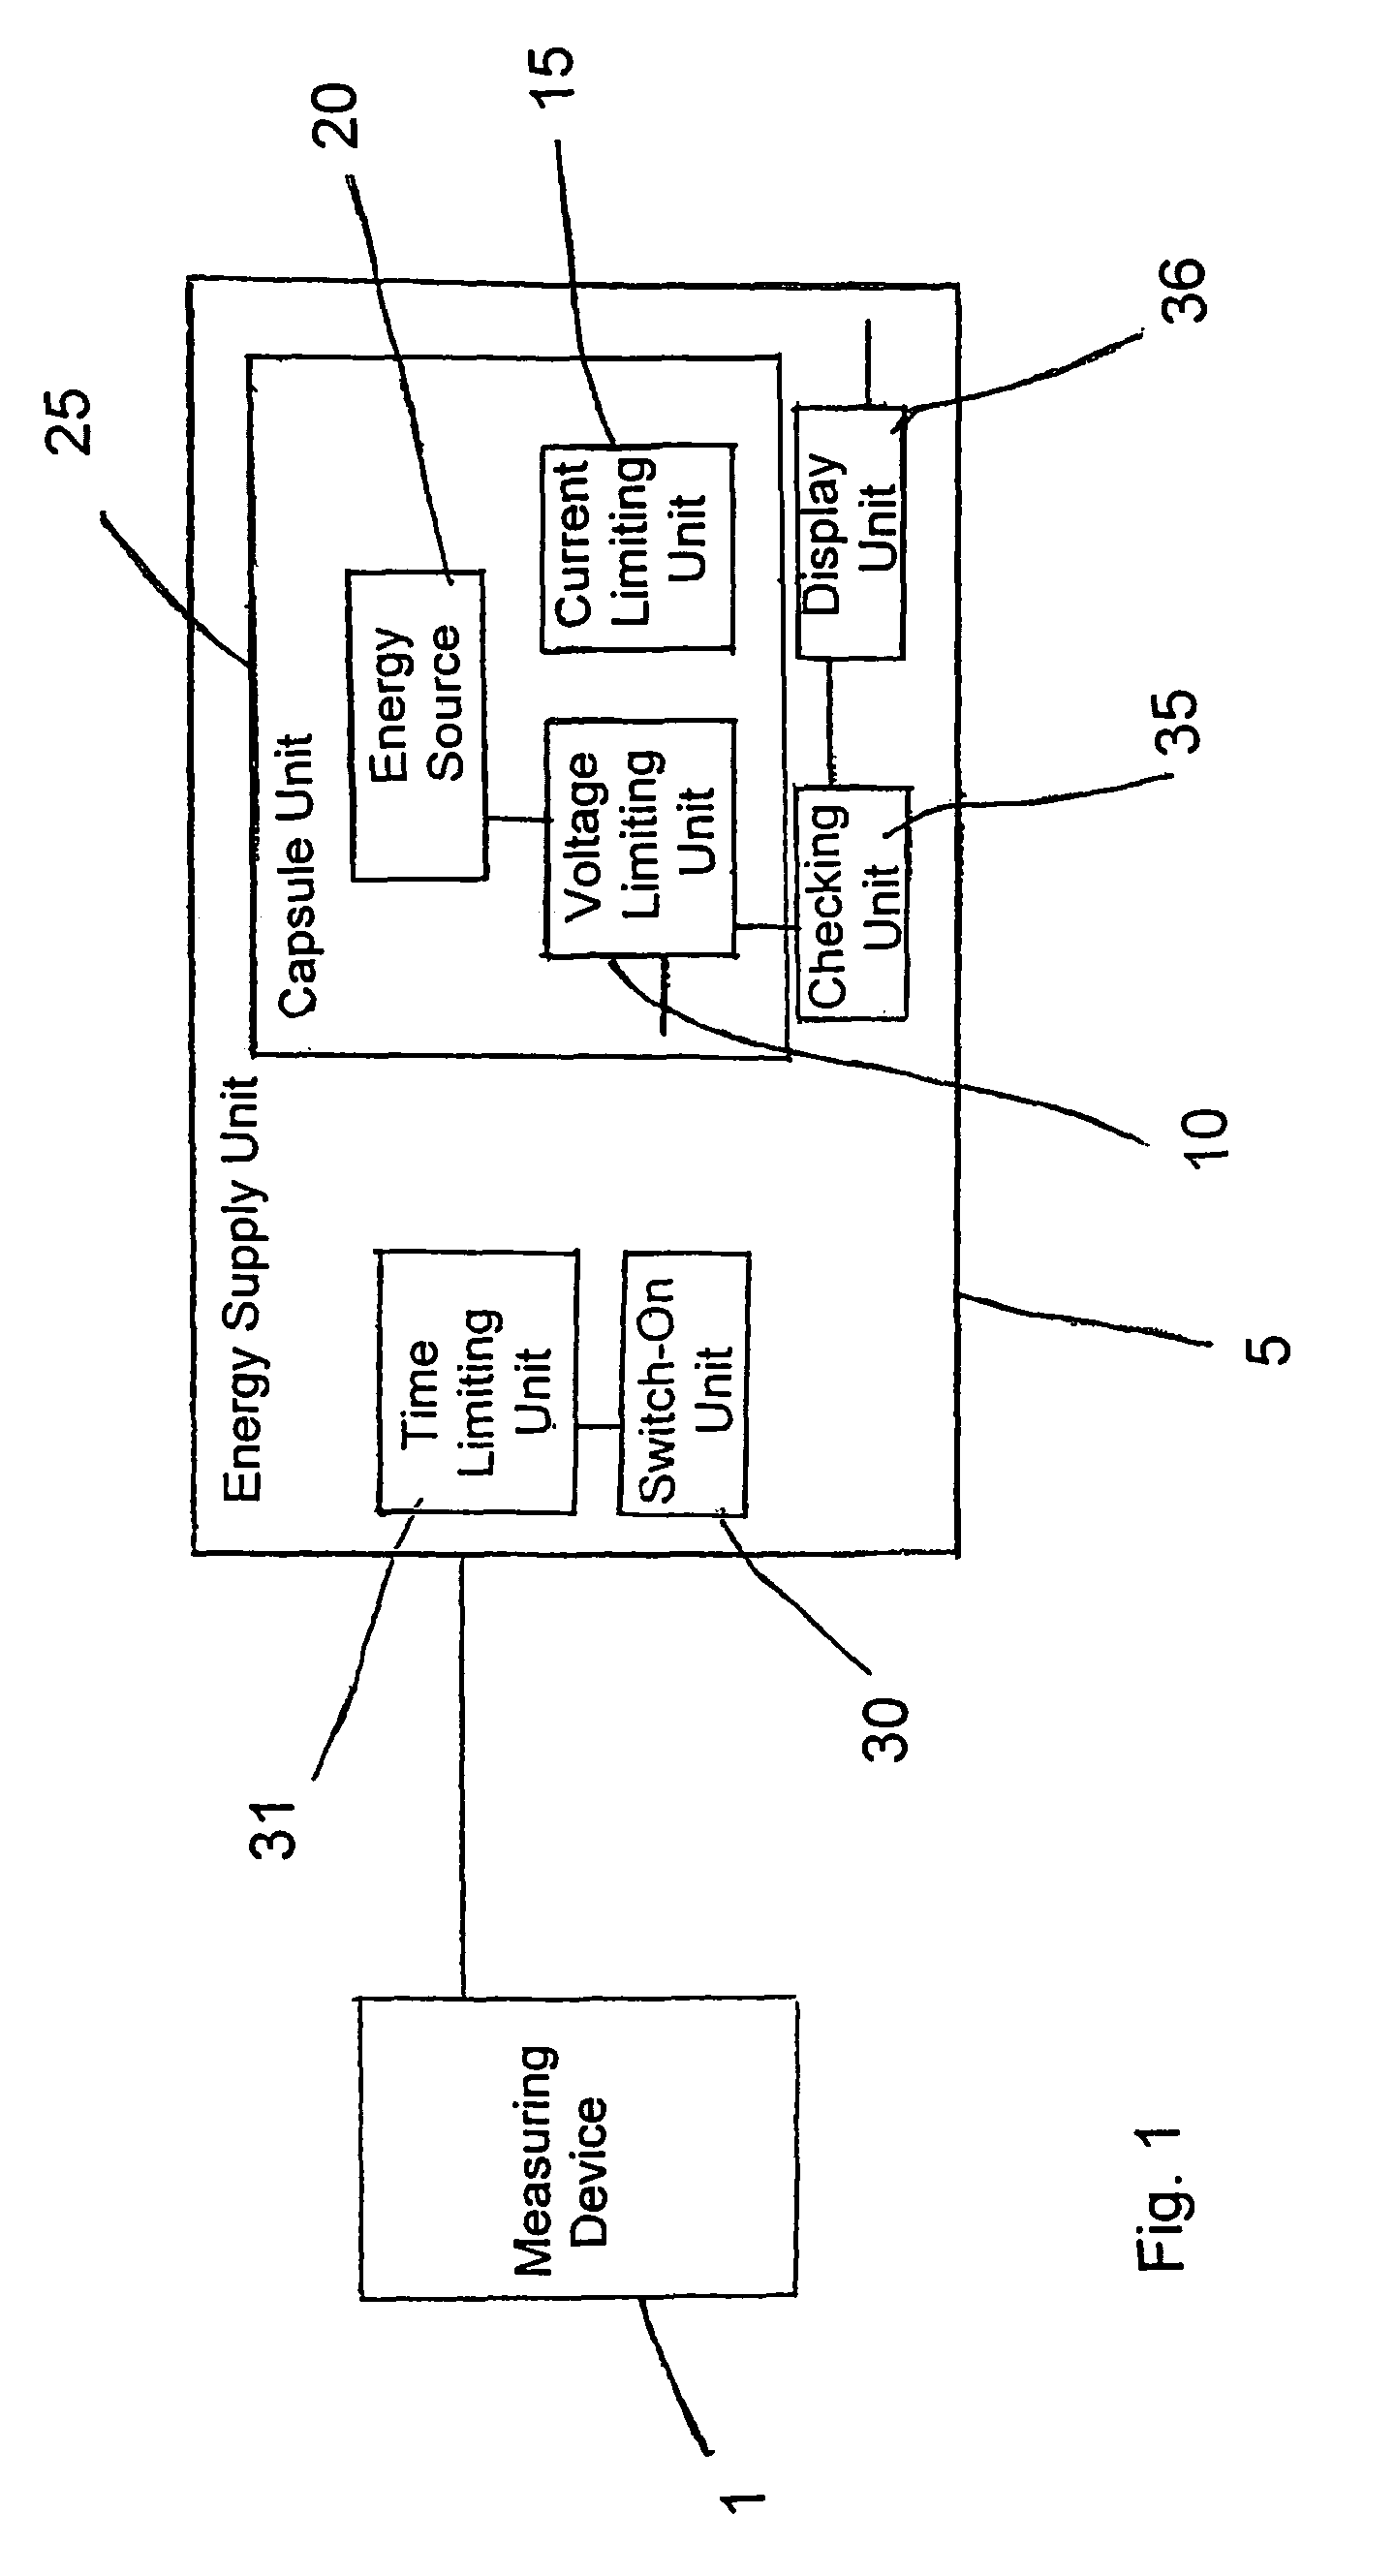 Energy supply of a measuring device